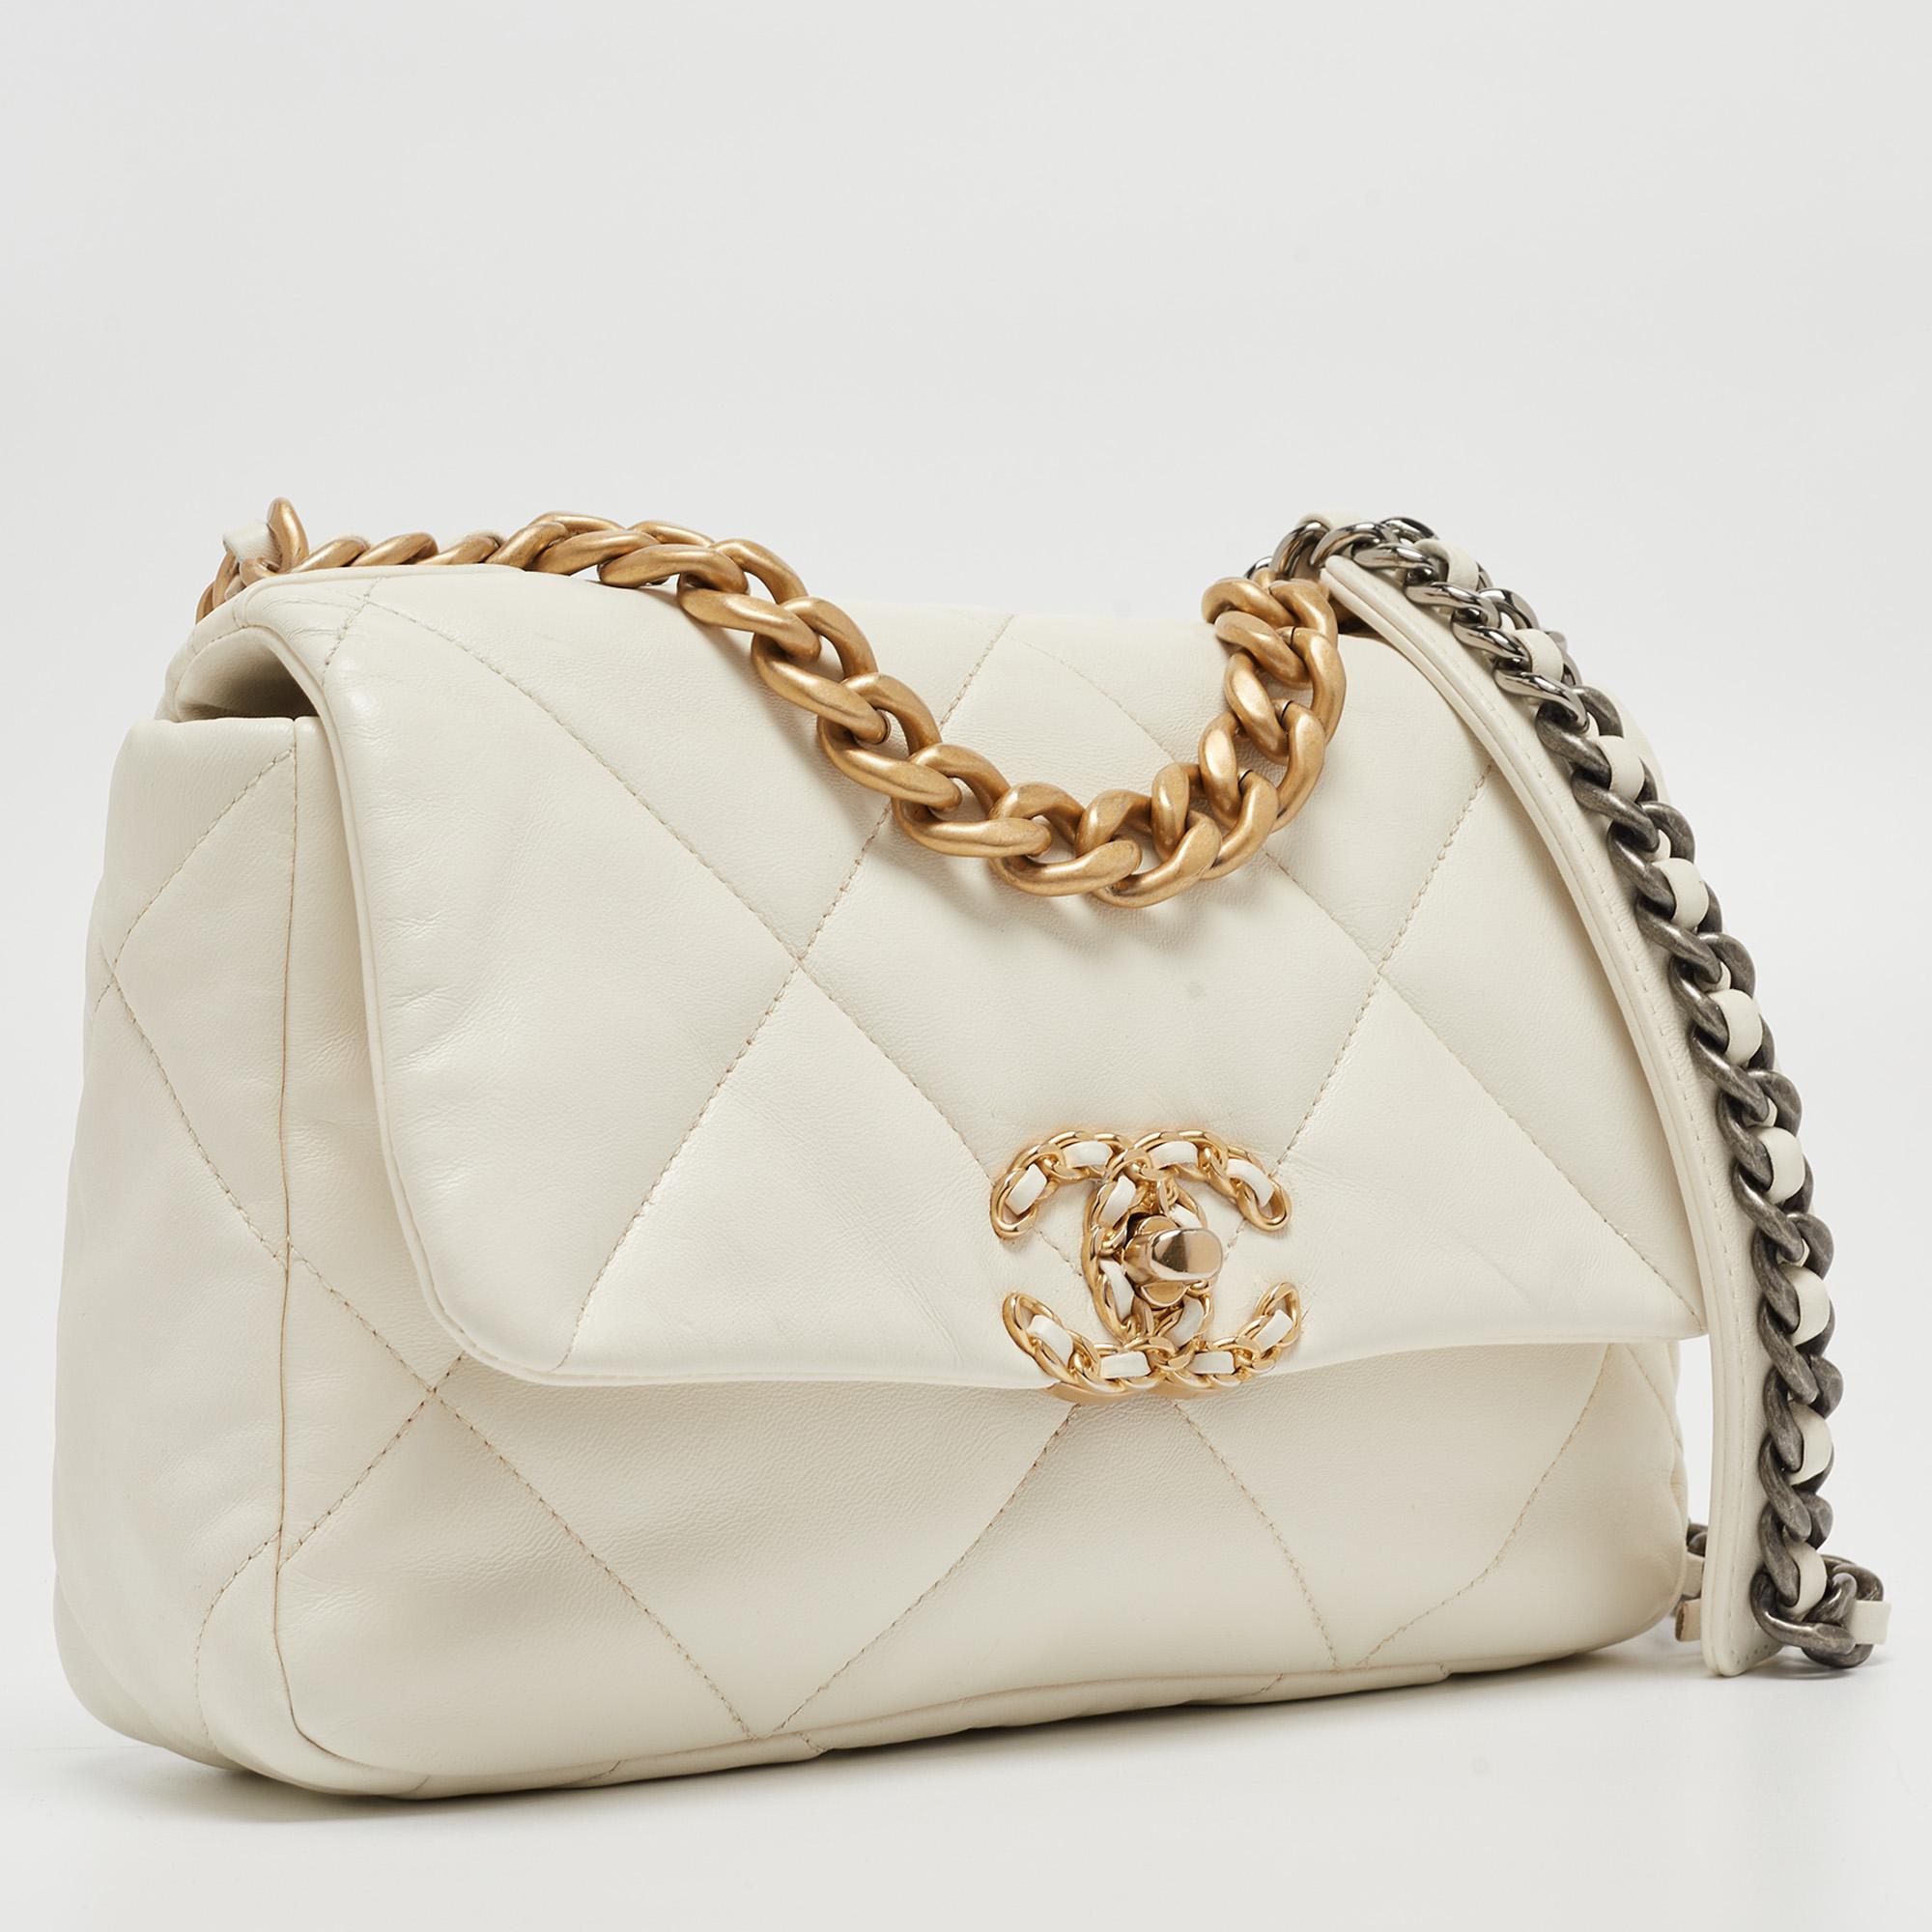 Chanel White Quilted Leather Small 19 Flap Bag 4